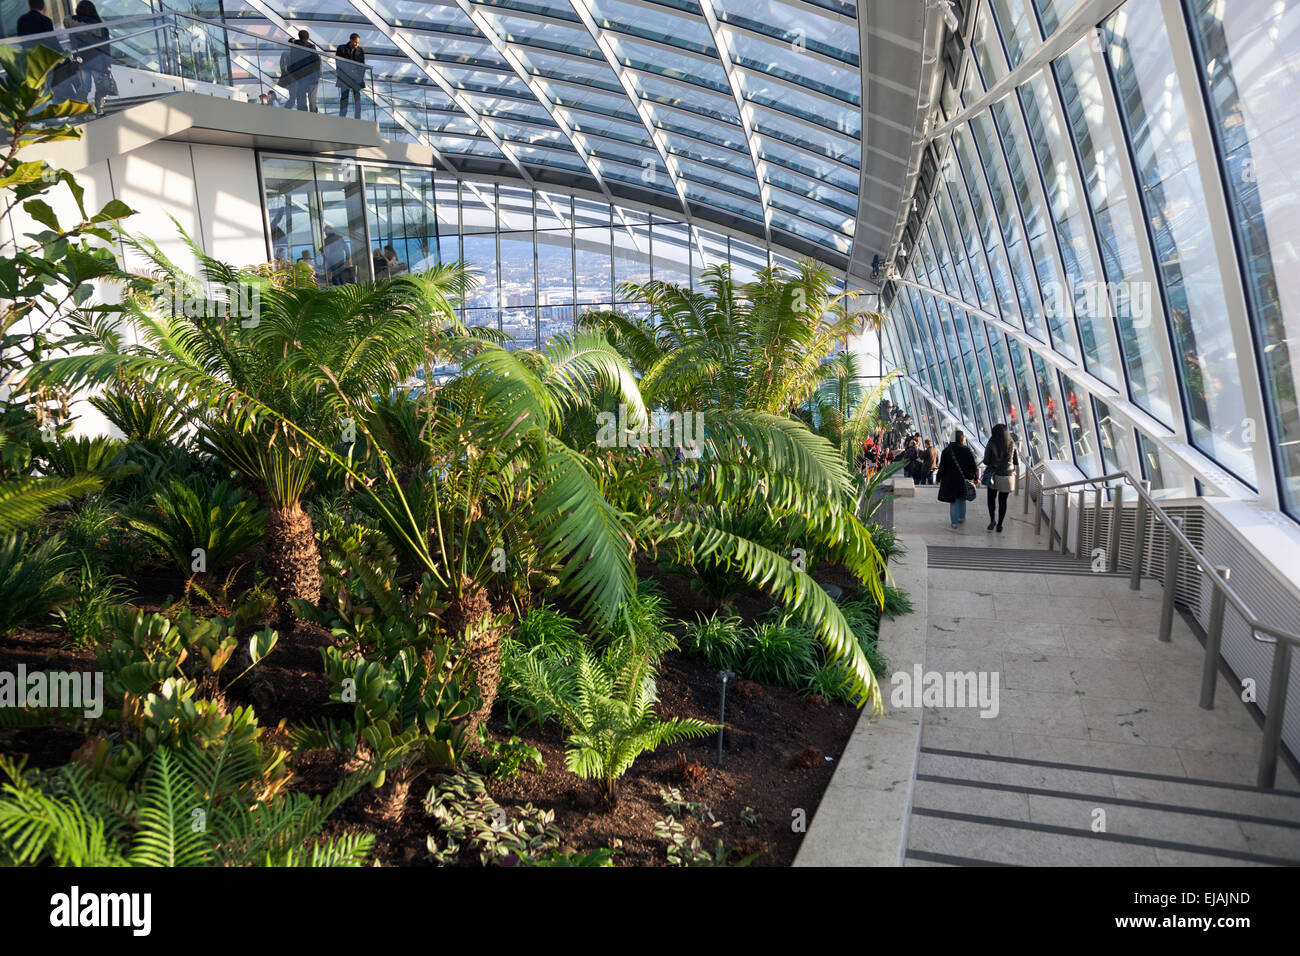 Sky Garden at the top of 20 Fenchurch Street (Walkie Talkie) in London, England Stock Photo